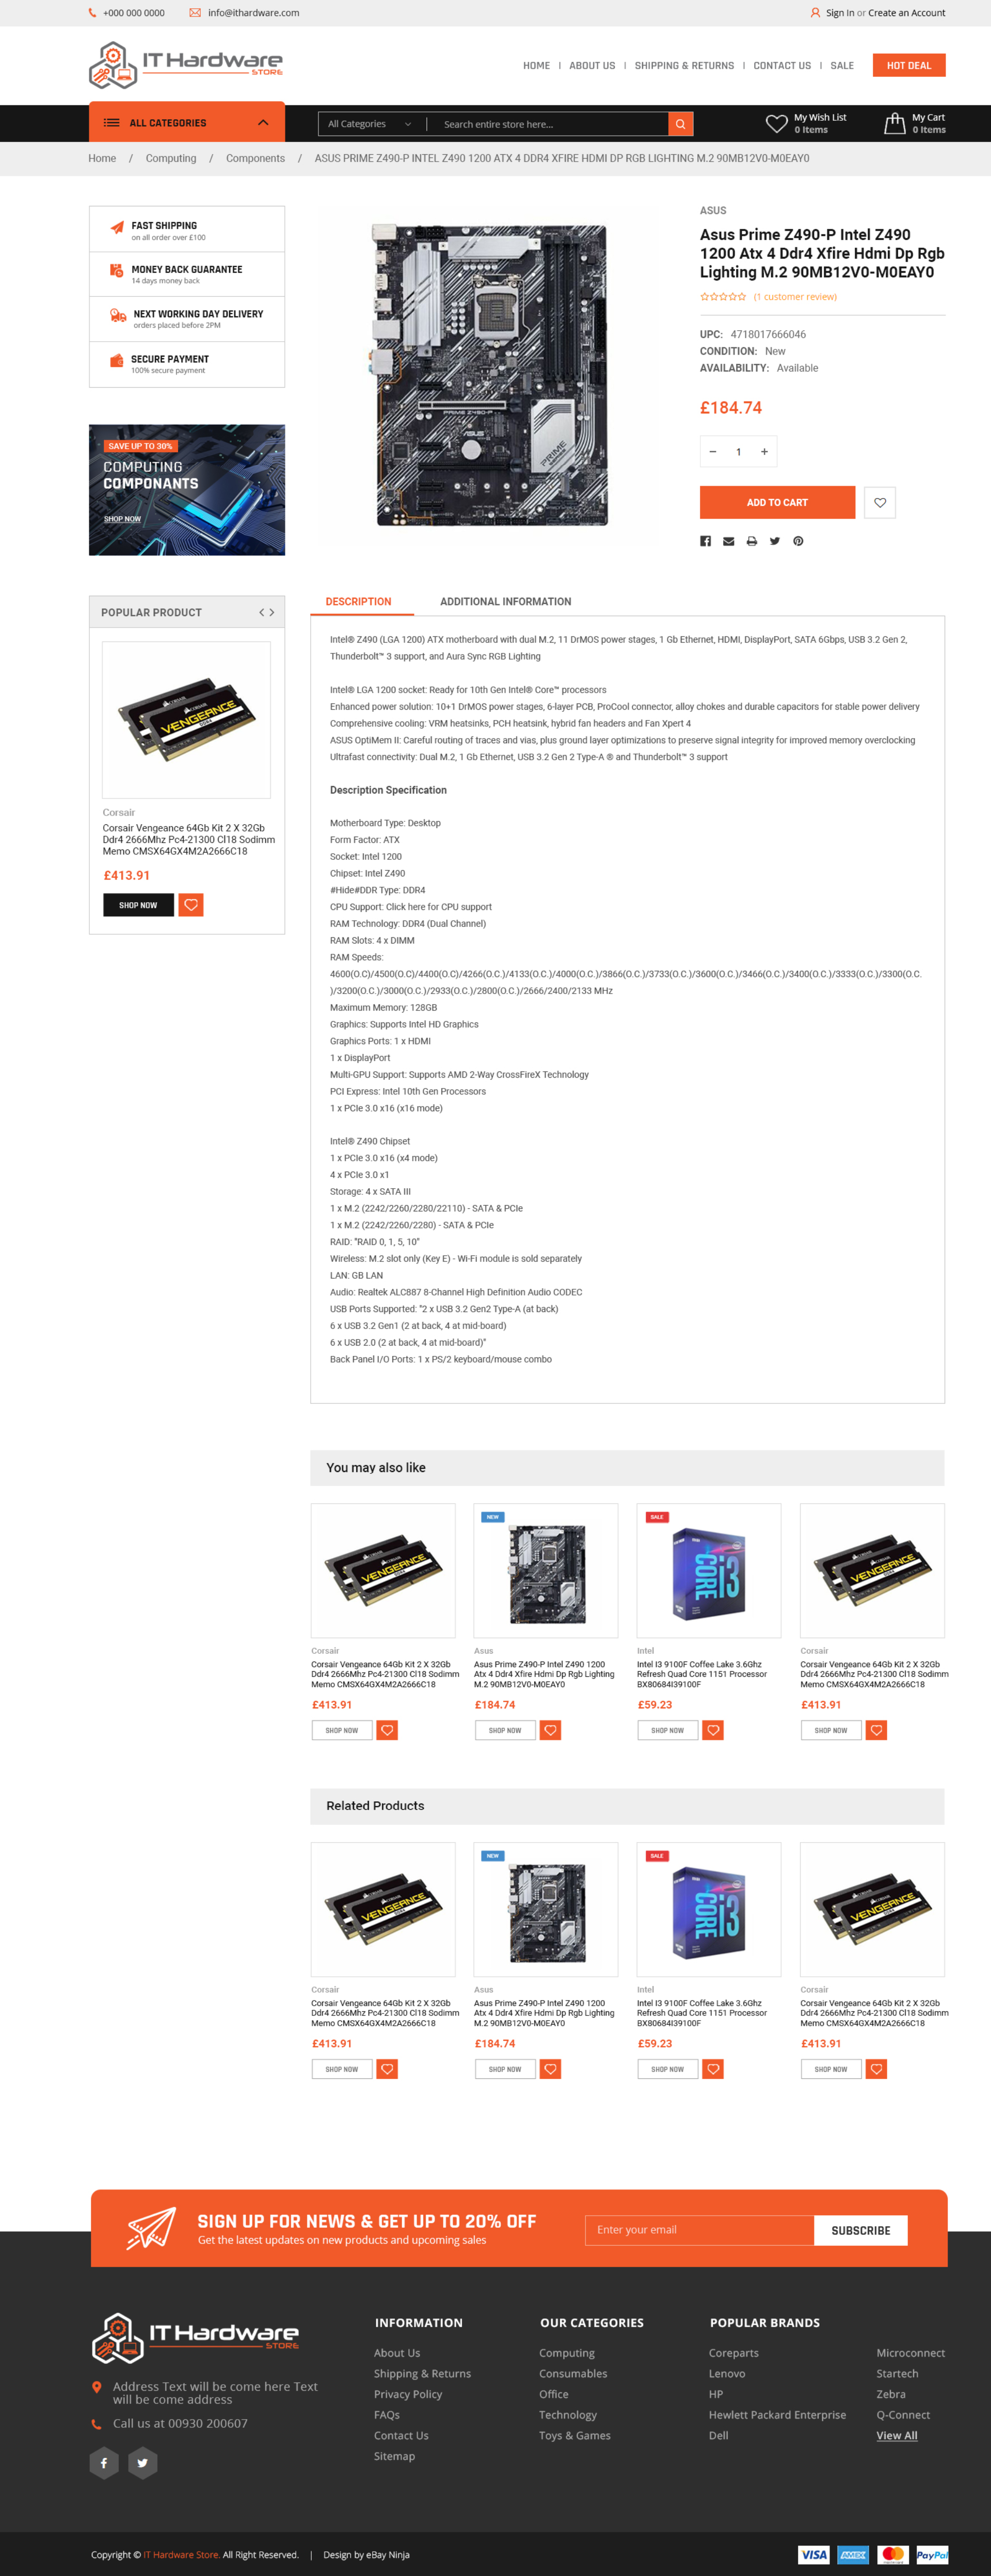 product detail page.jpg (1600×4000)